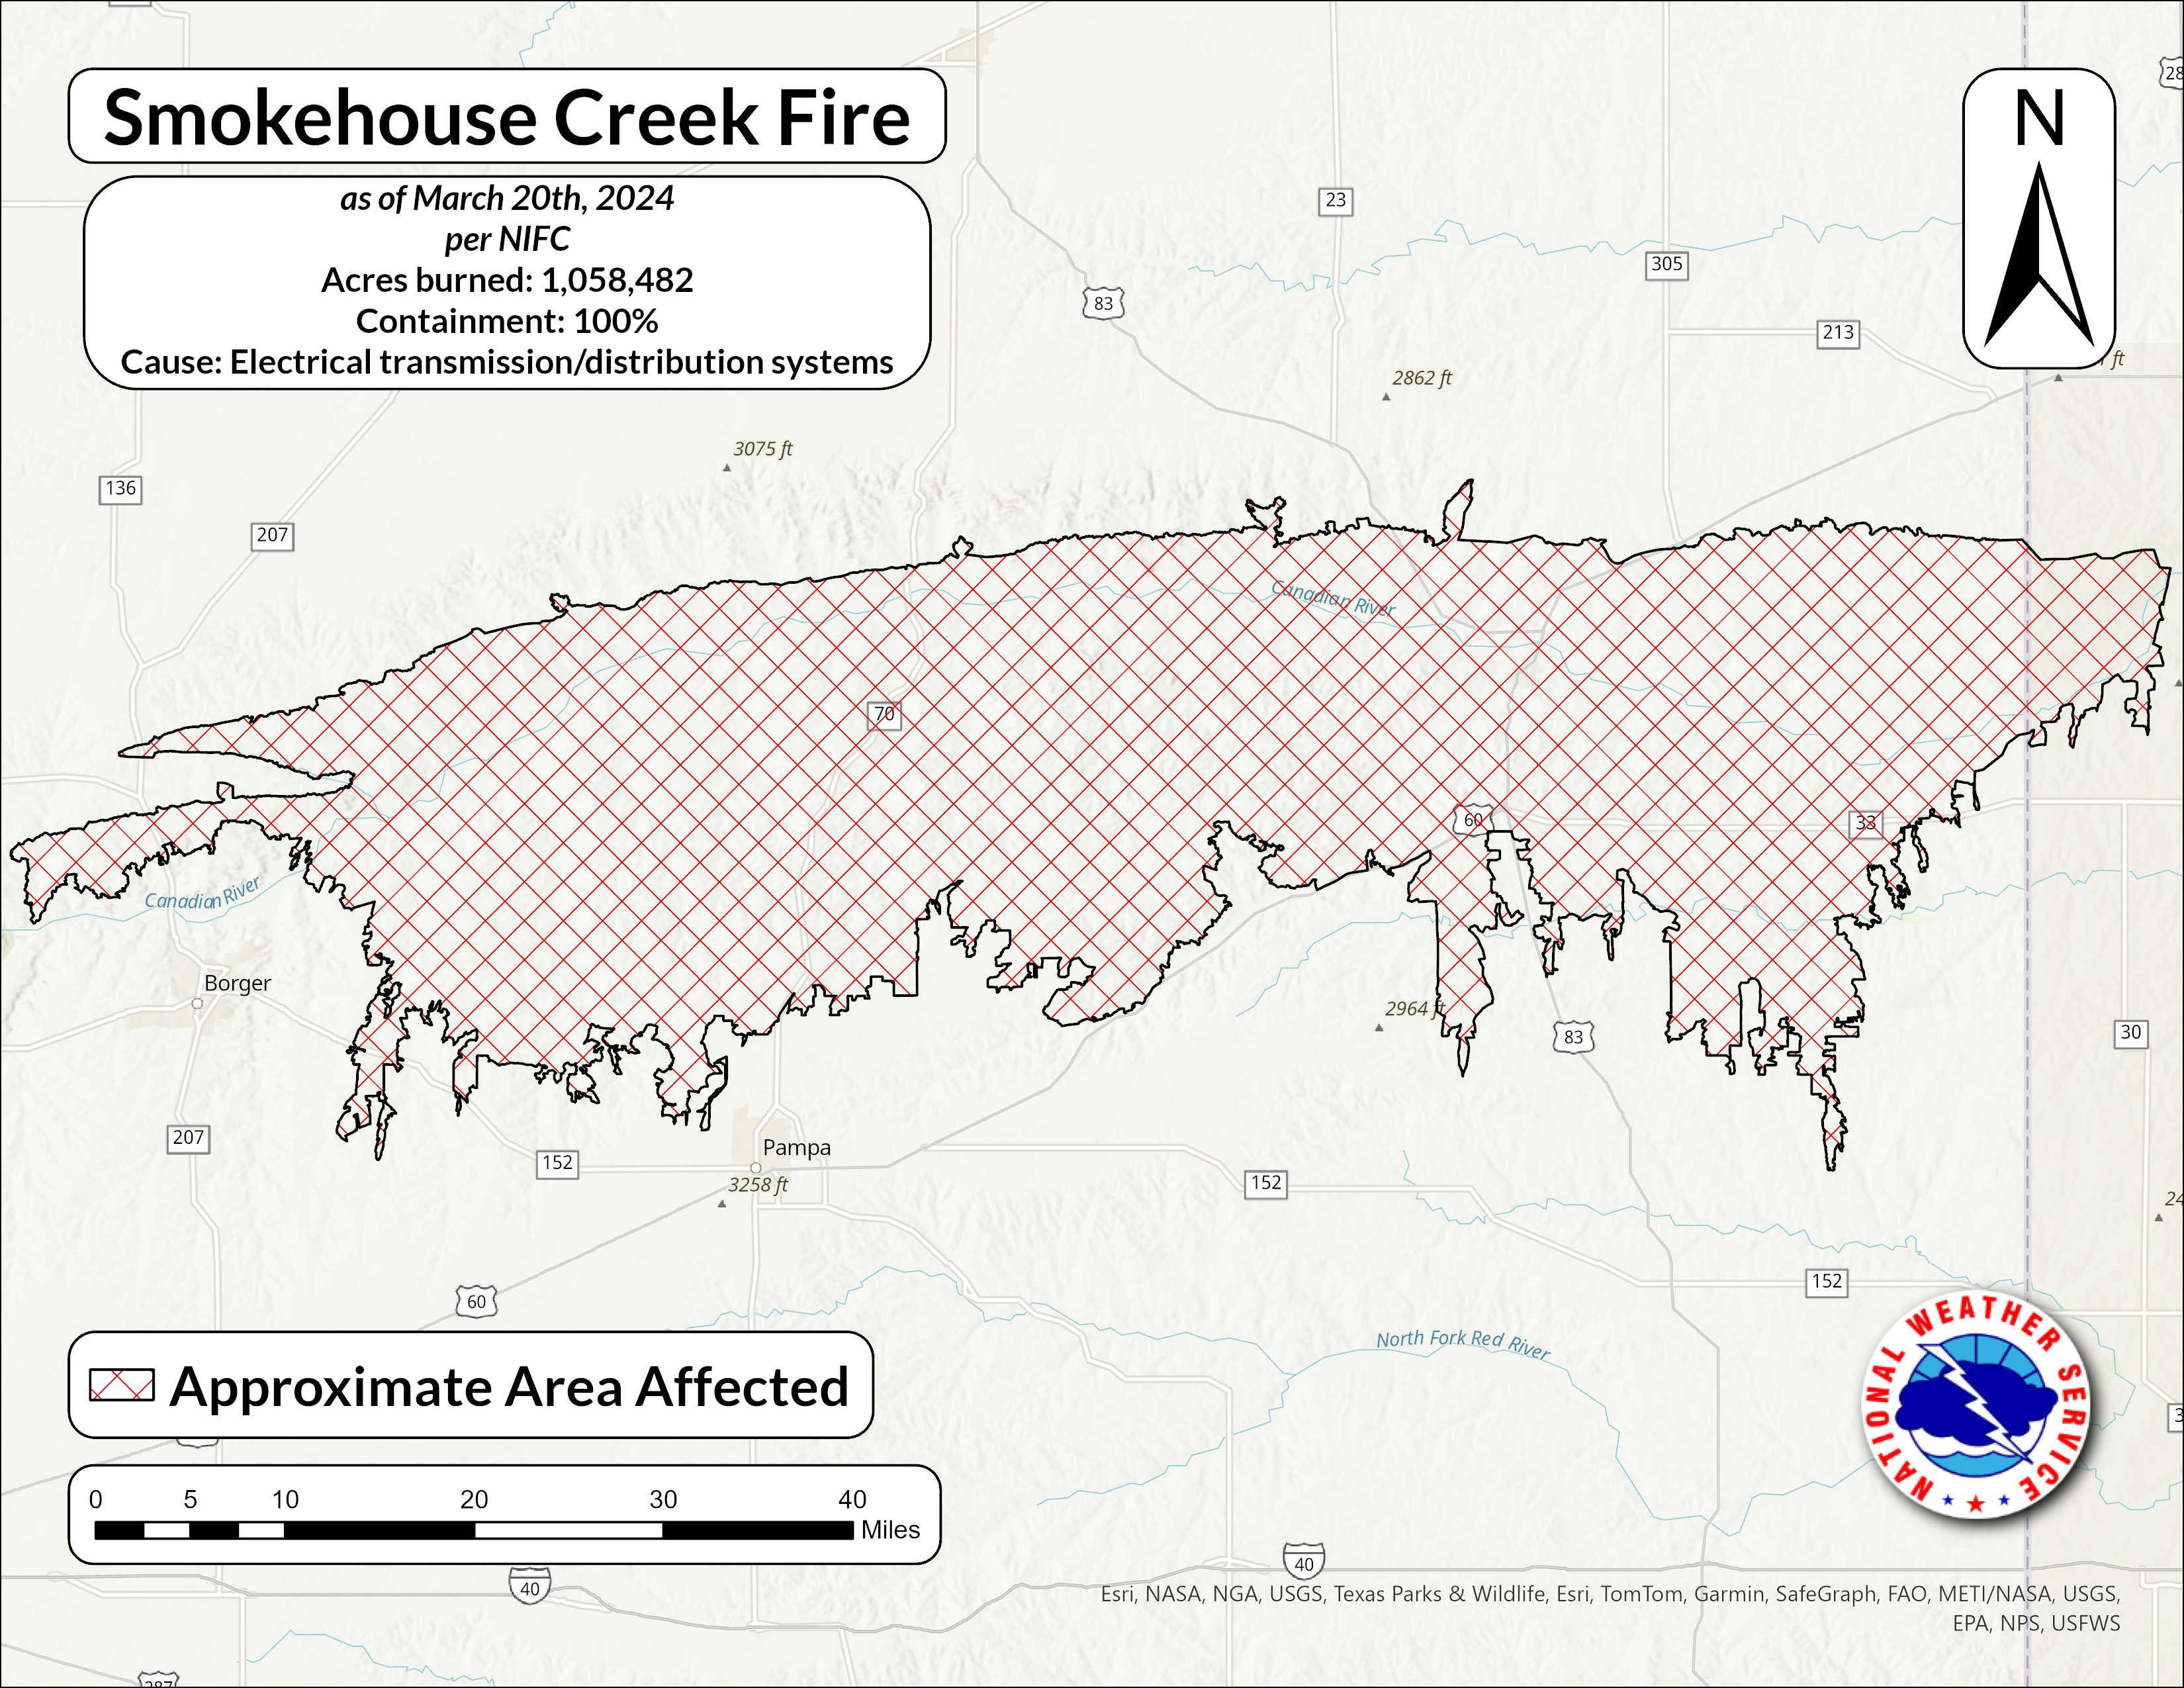 Map of the Smokehouse Creek Fire showing information from the National Interagency Fire Center as of March 20th, 2024. This fire burned 1,058,482 acres and is 100 percent contained. Per NIFC, the cause of the initial fire start was electrical transmission and/or distribution systems.